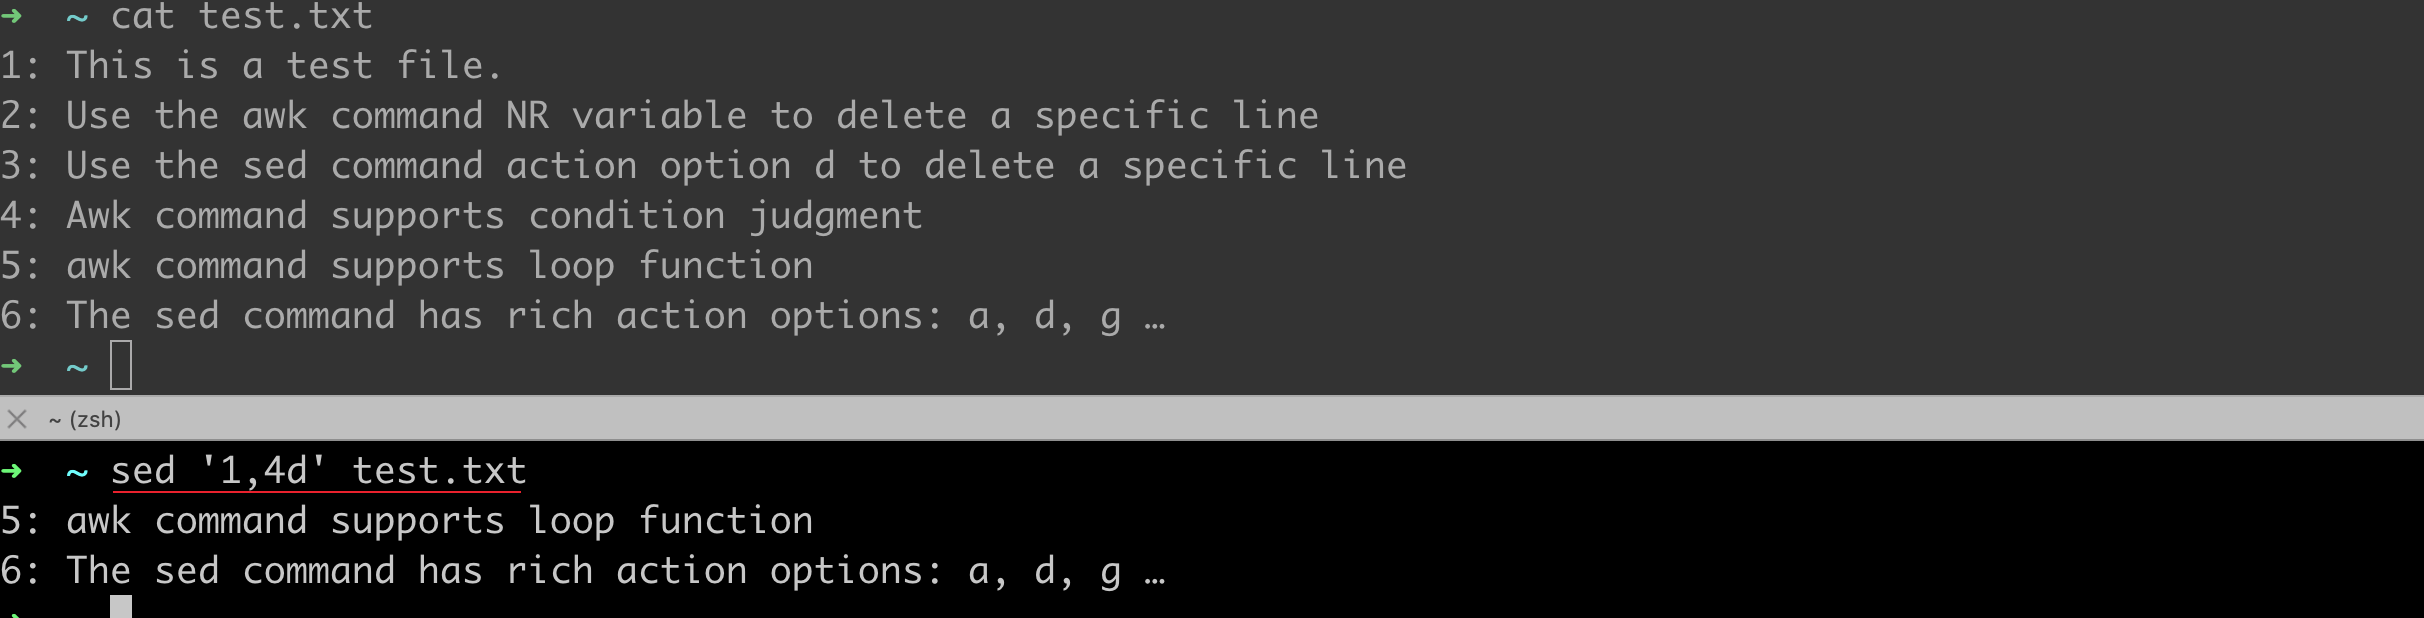 How To Remove Lines With Specific Line Number From Text File With Awk Or Sed In Linux Unix